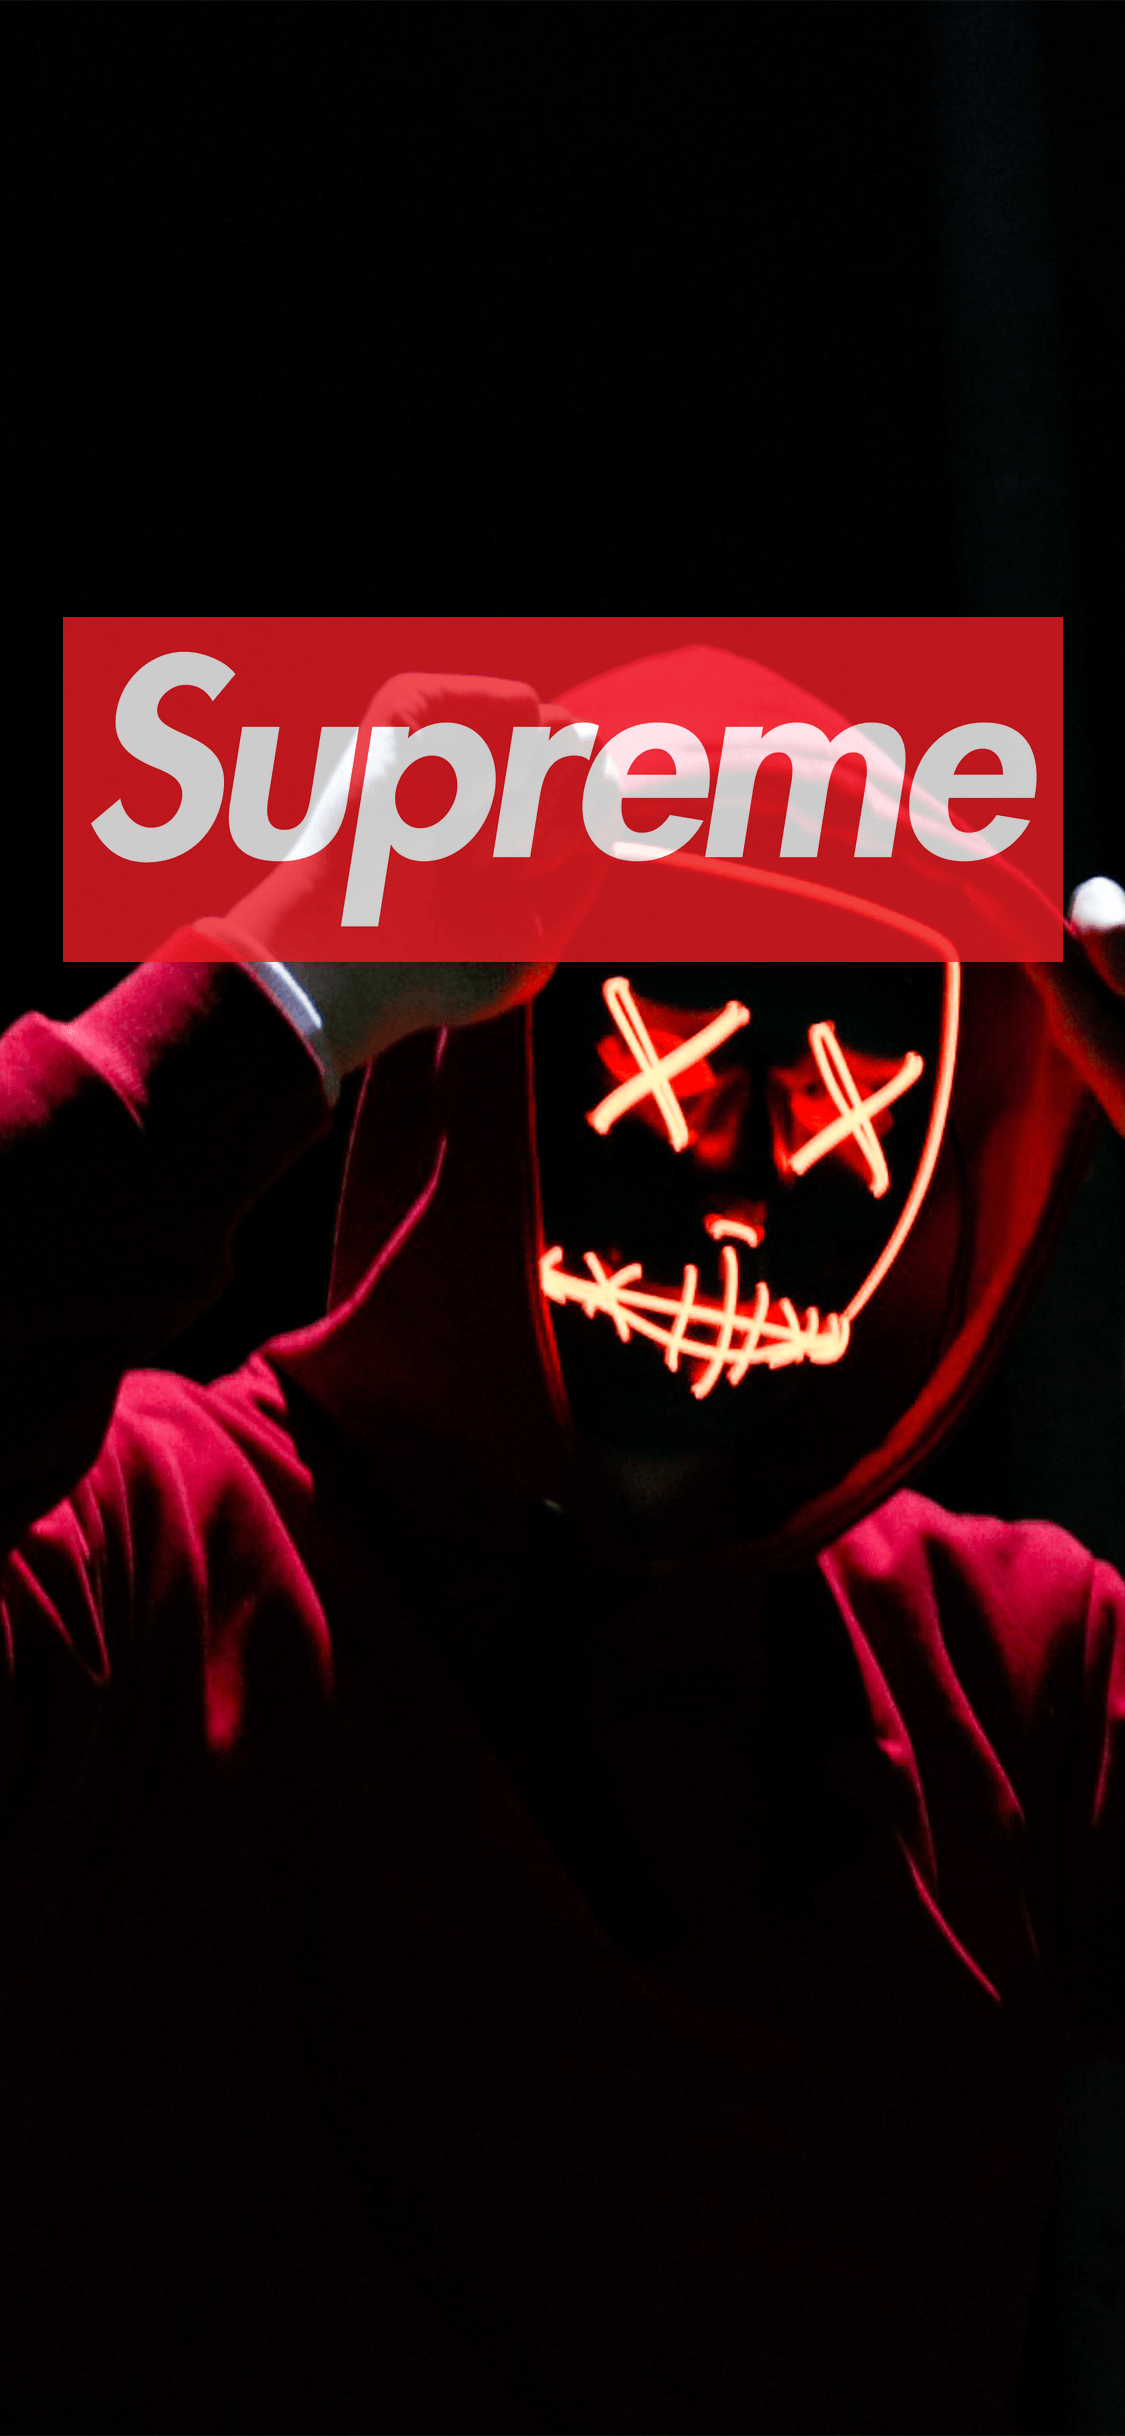 Cool Things with Supreme Logo